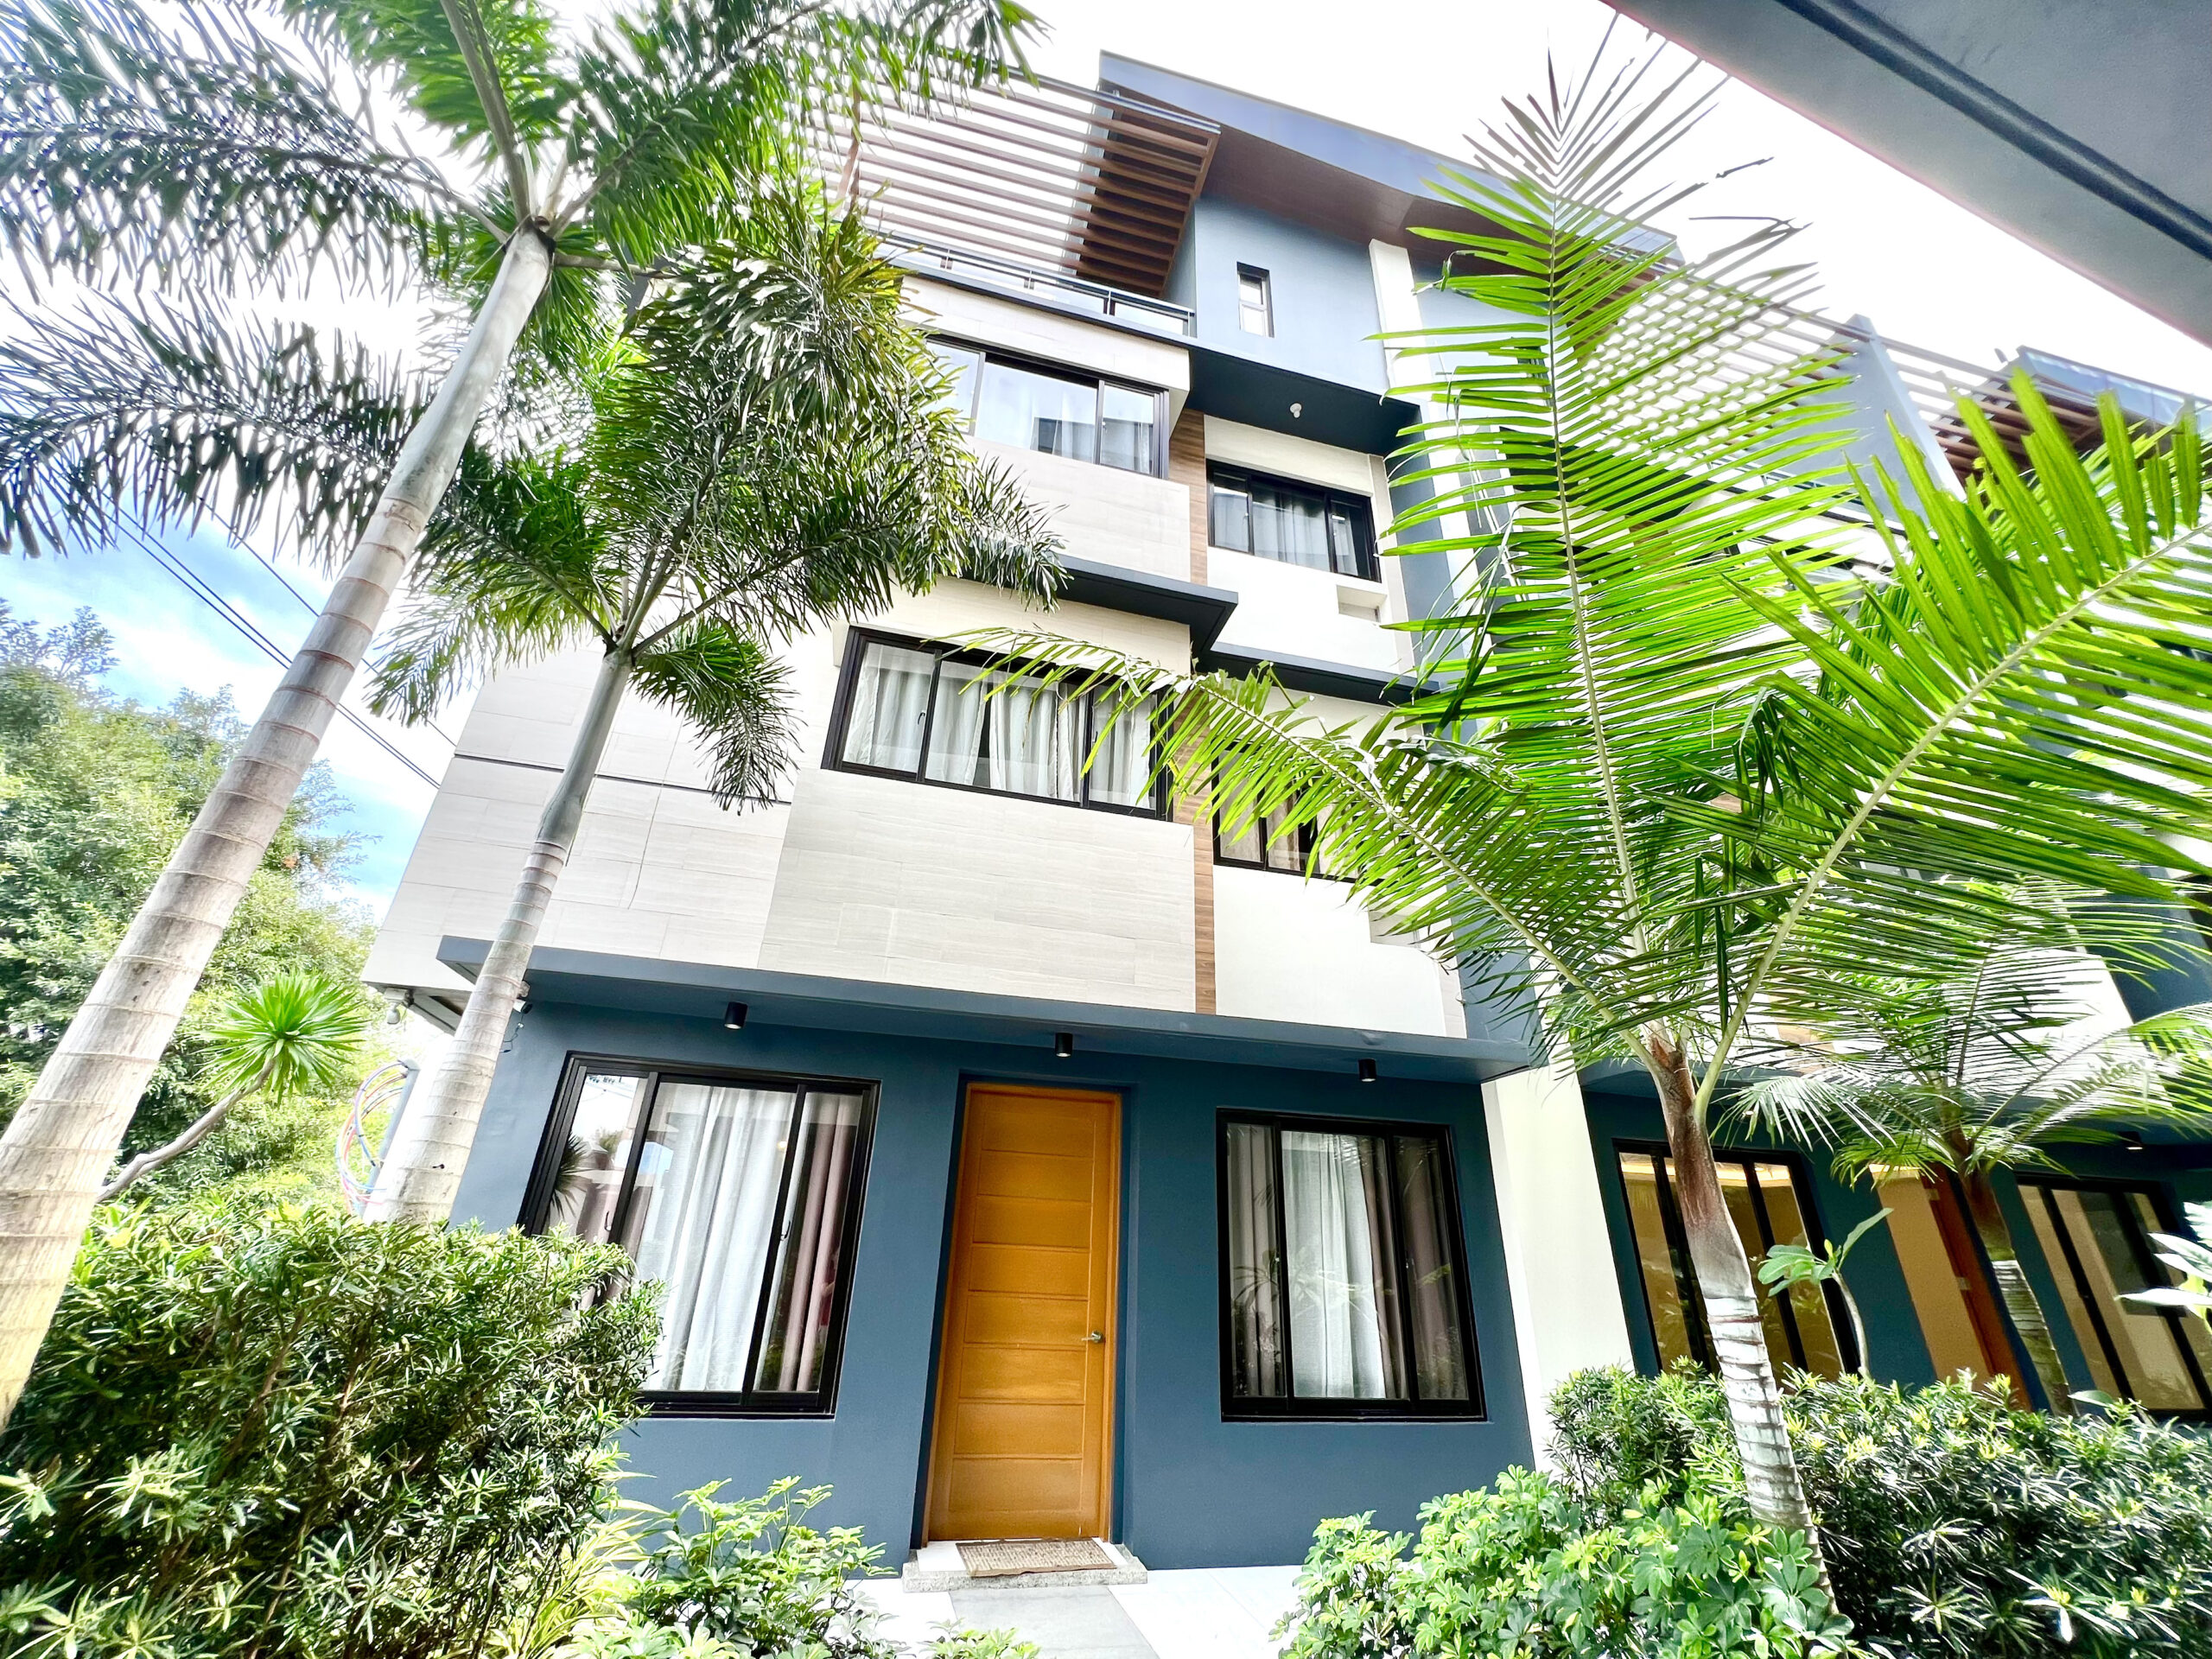 M2302: AFFORDABLE & CLASSY 3-4 BEDROOM TOWNHOUSE IN SAN JUAN